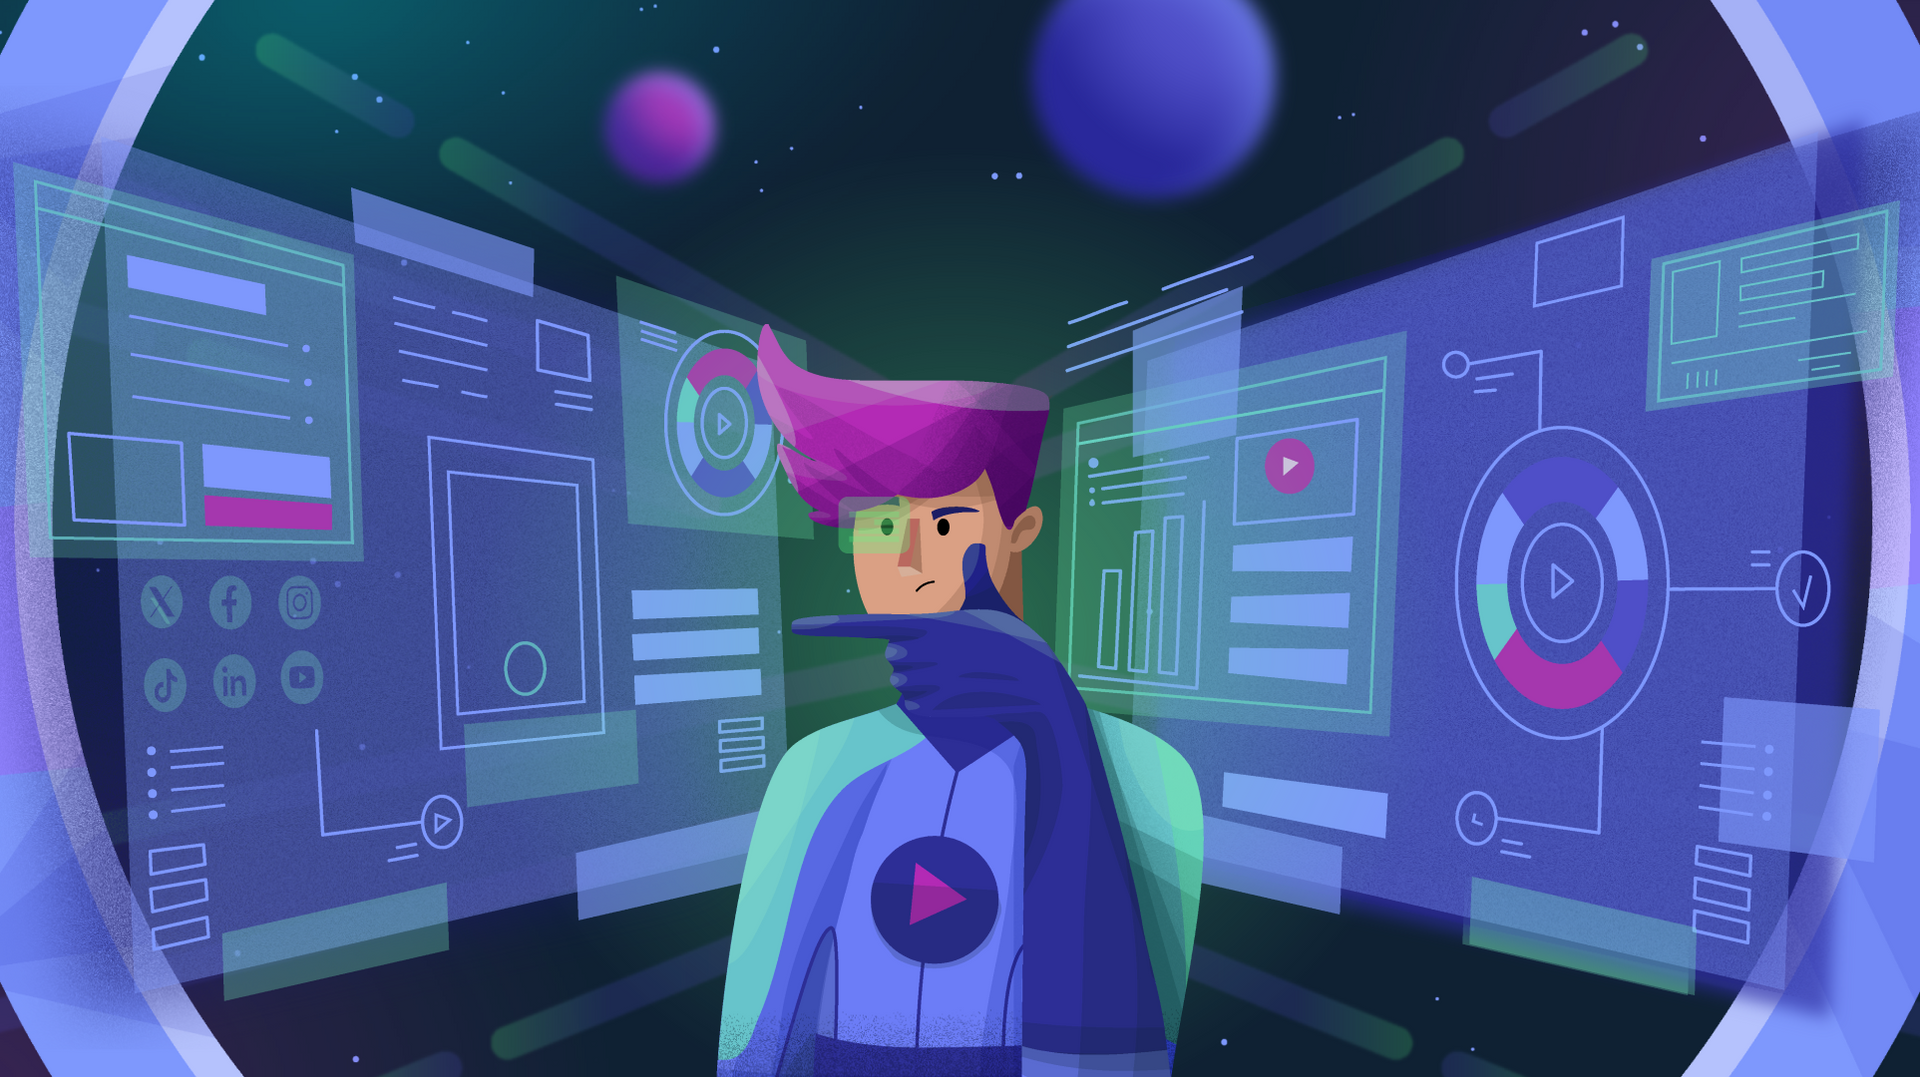 Character in space surrounded by screens with graphs